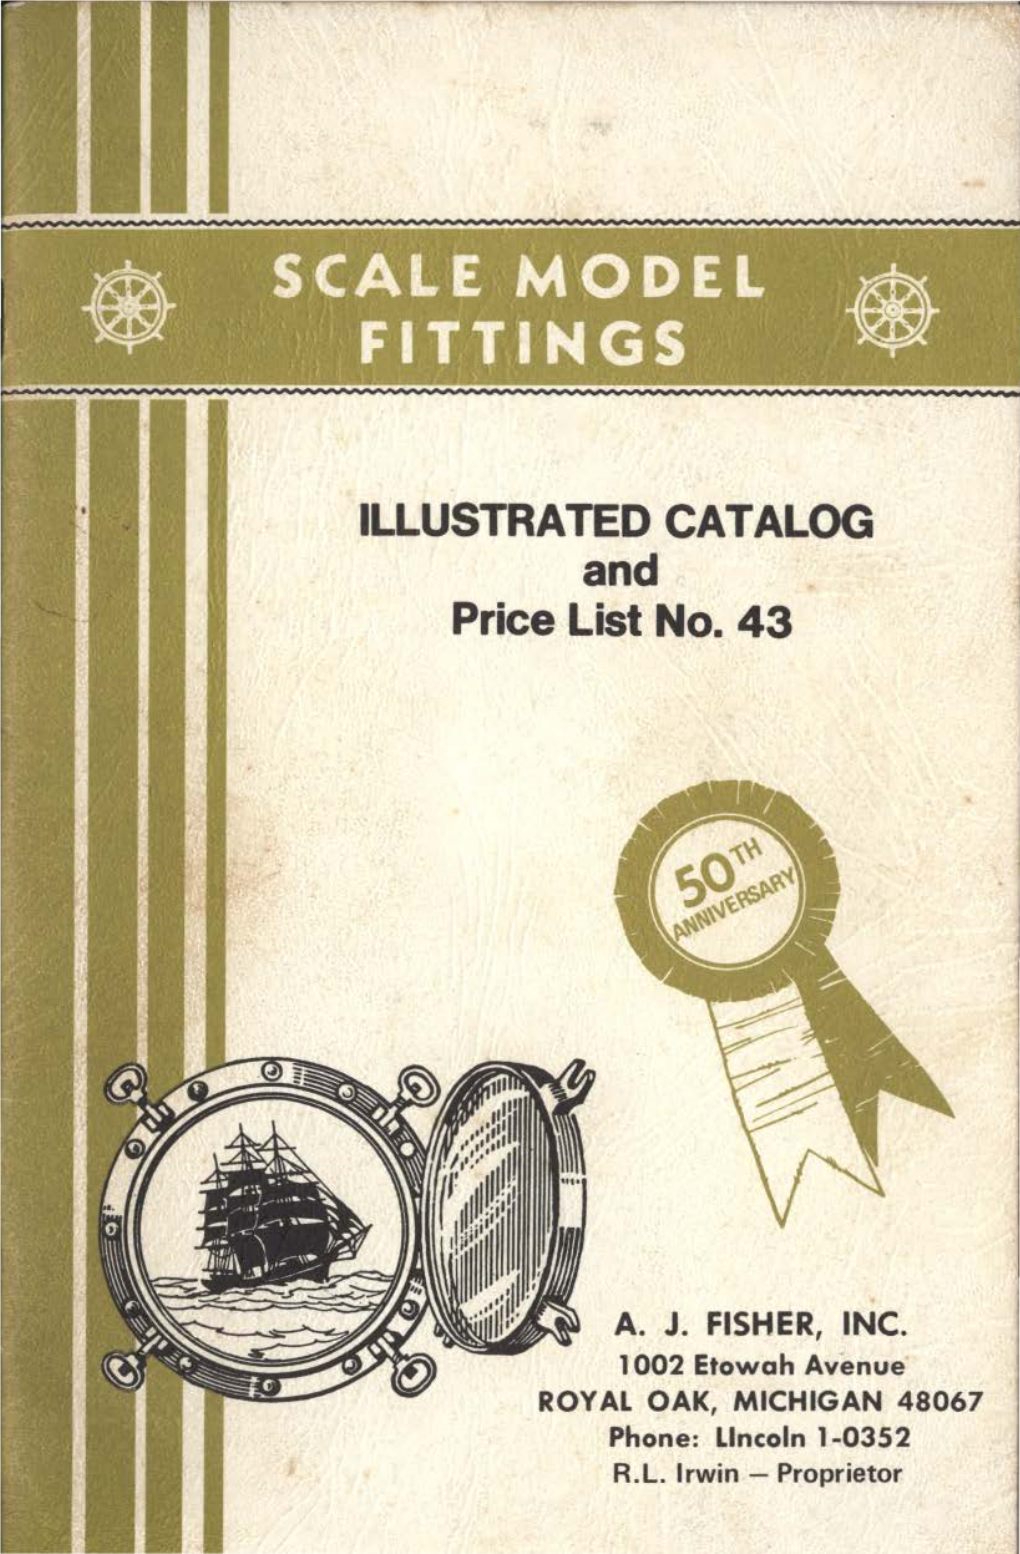 ILLUSTRATED CATALOG and Price List No